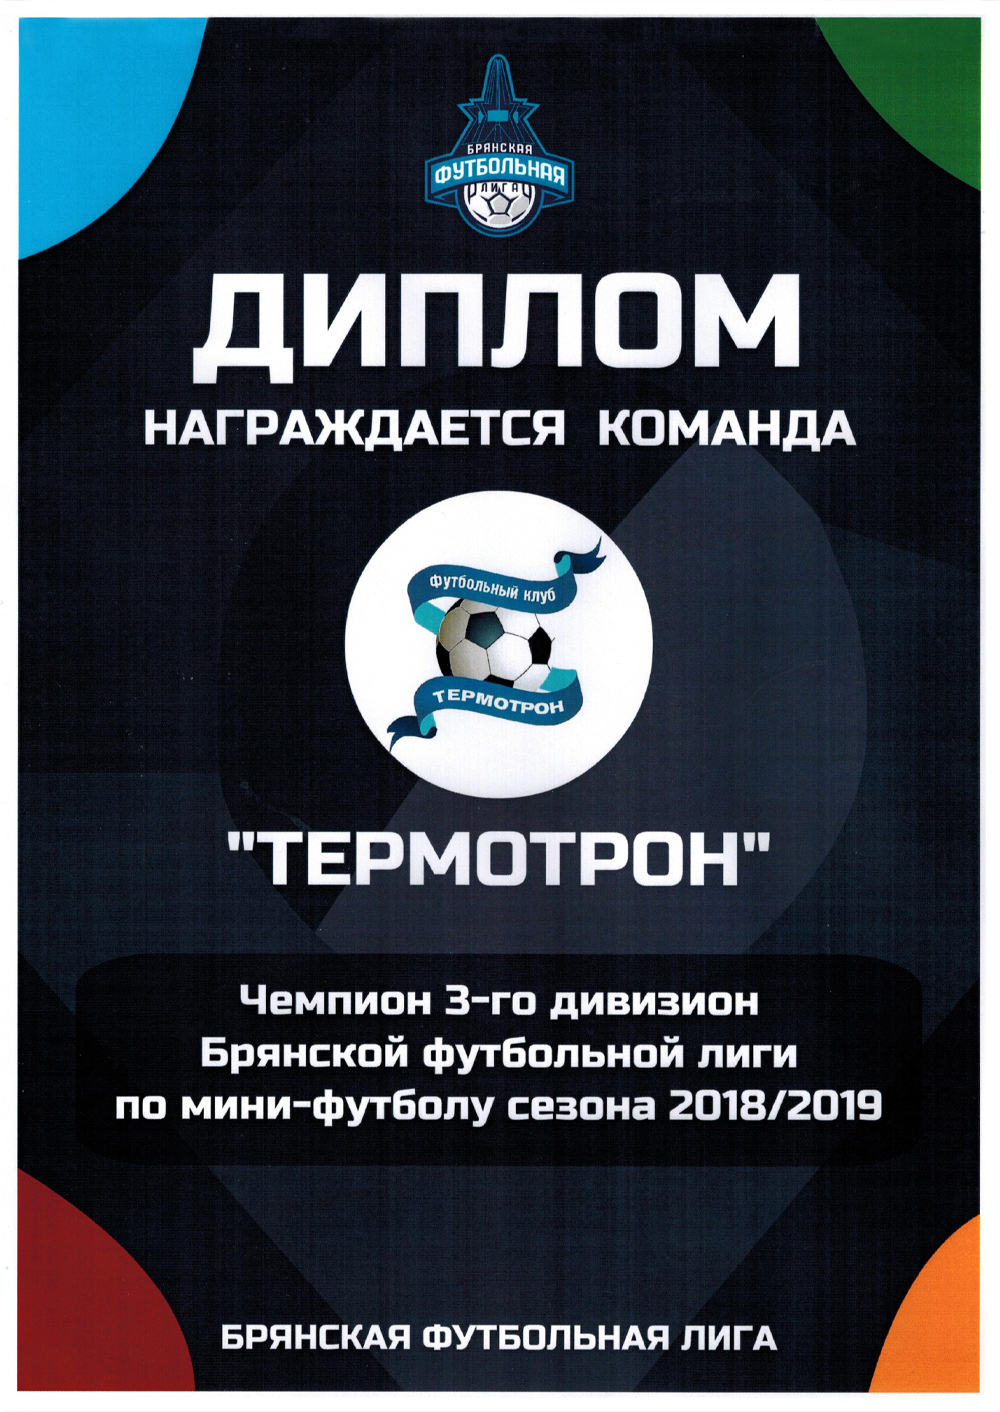 Champion of the 3rd Division of the Bryansk Football League 2018/19 season